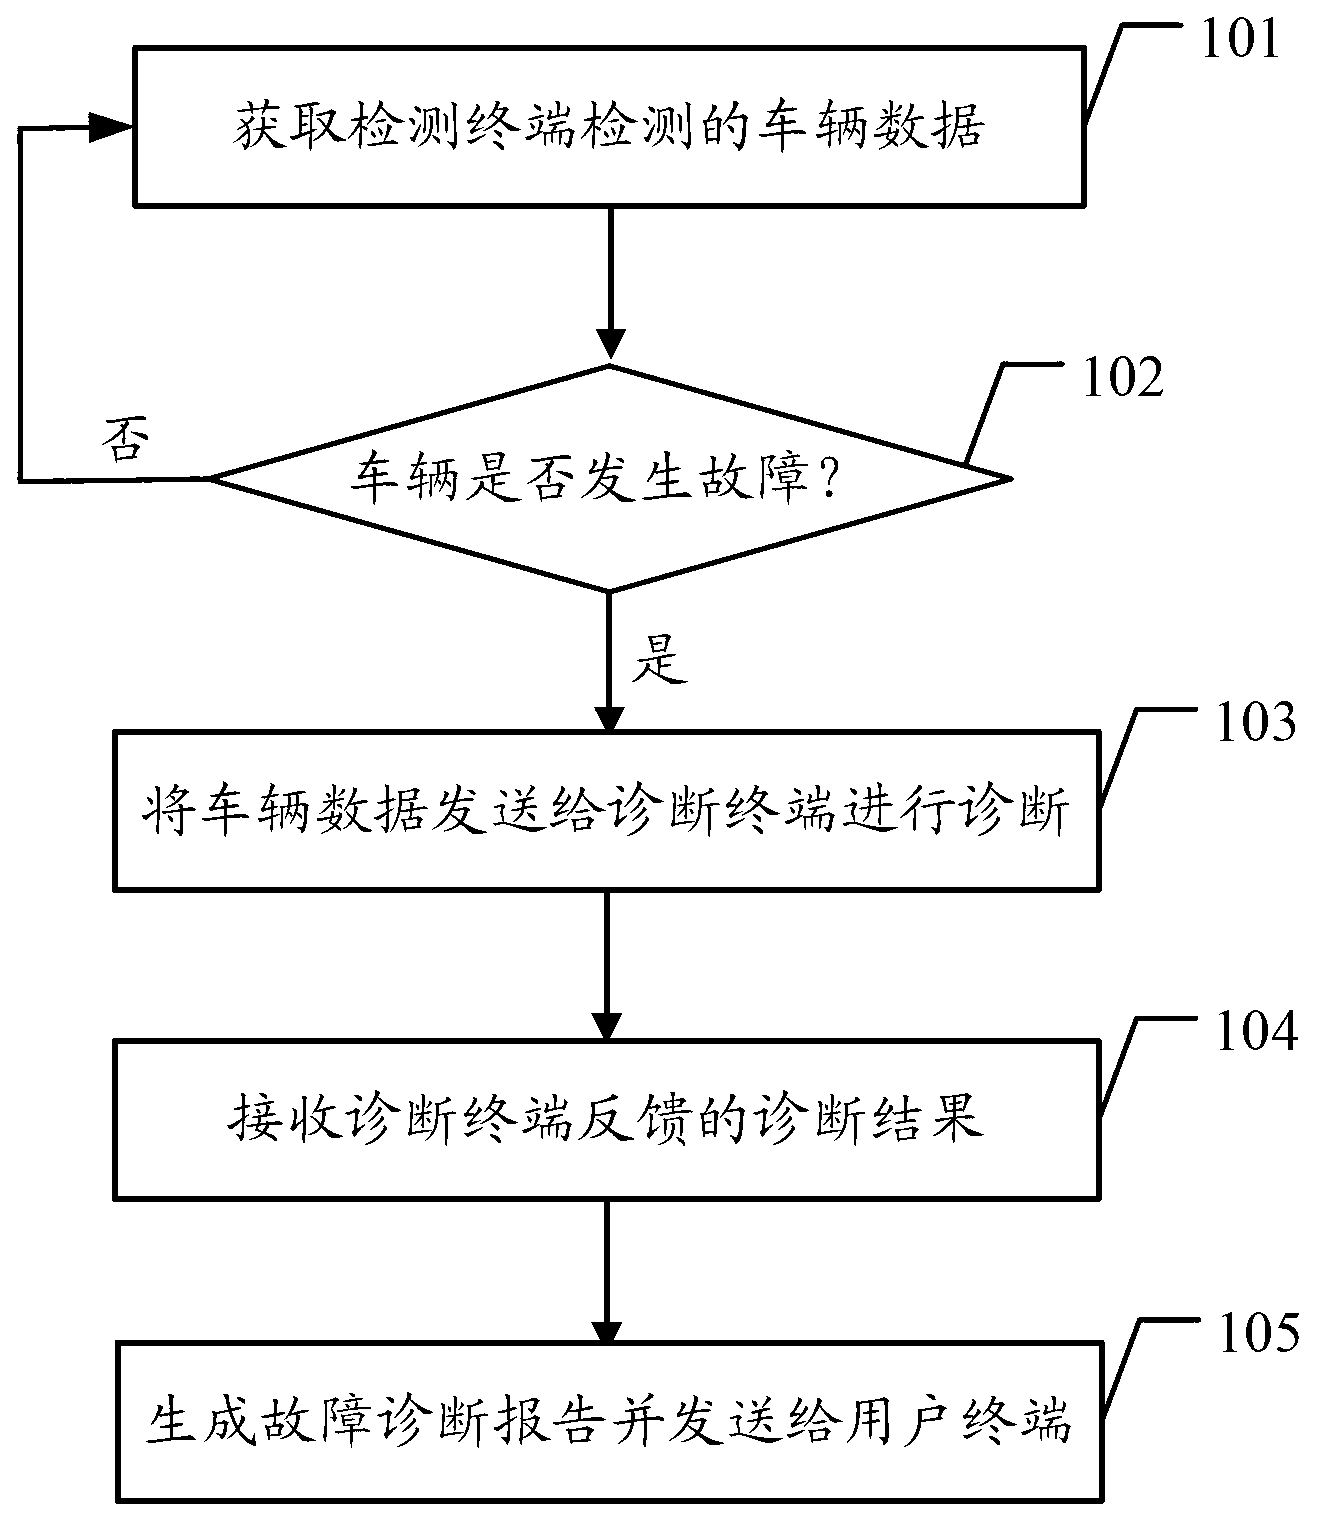 Vehicle diagnostic method and server